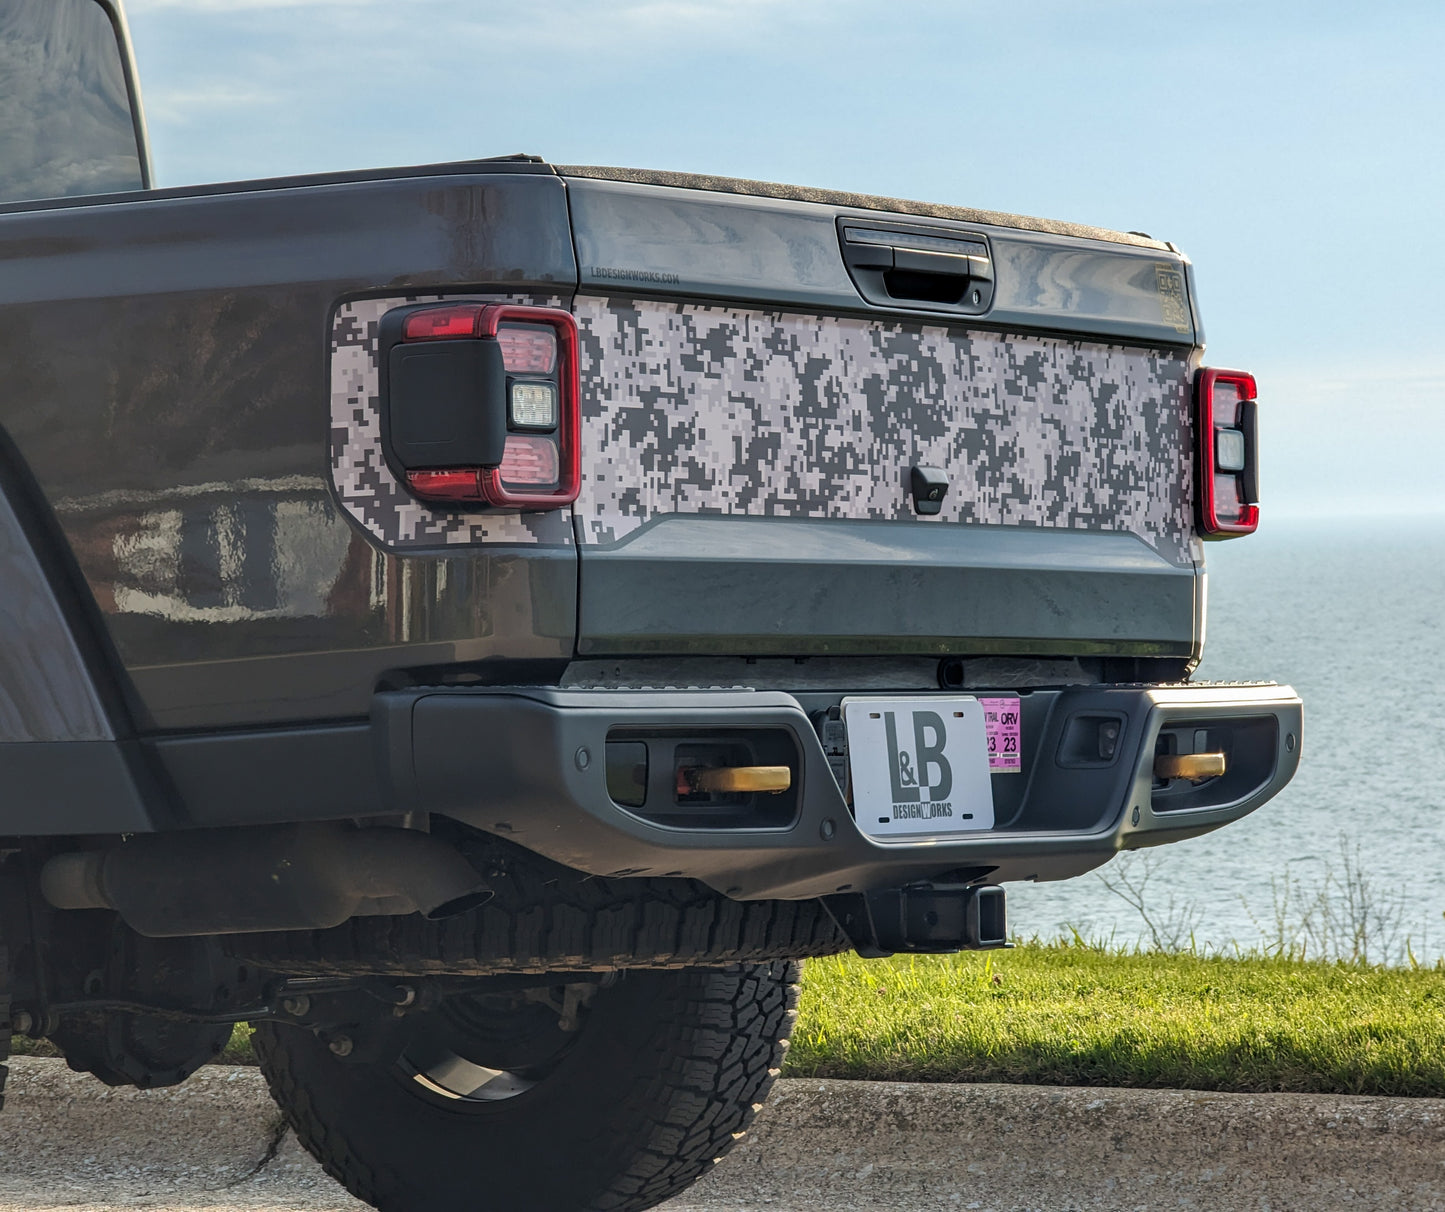 Digital Camouflage Printed Blackout Arched Tailgate Color Line Rubicon Mojave decal set- fits 2020 and newer Jeep Gladiator